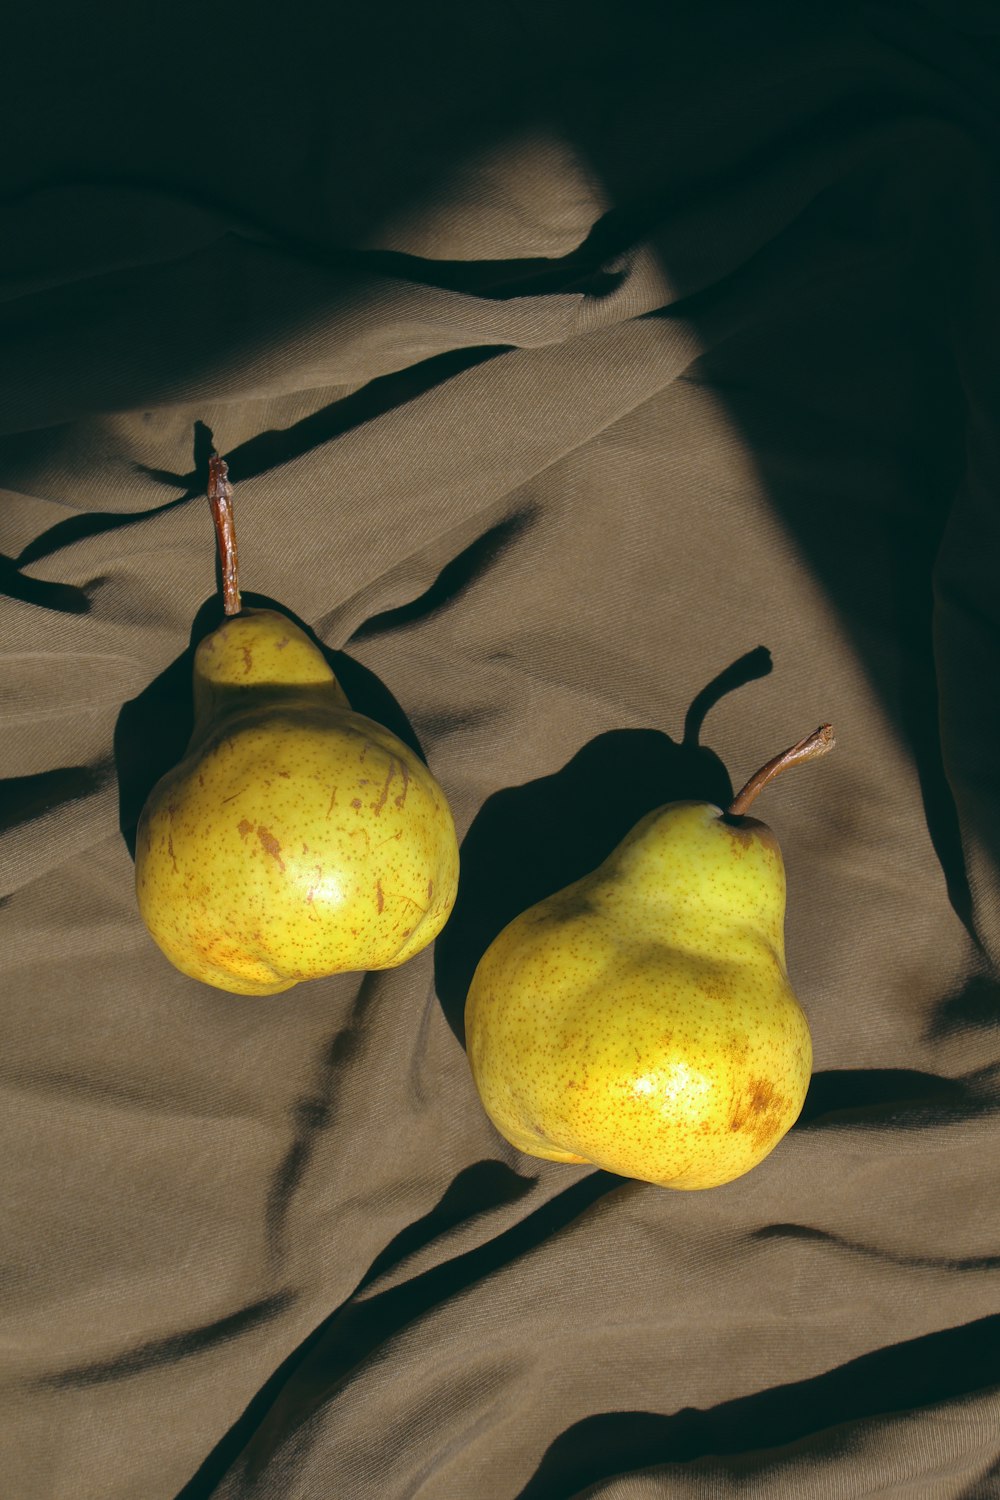 two peace fruits on fabric